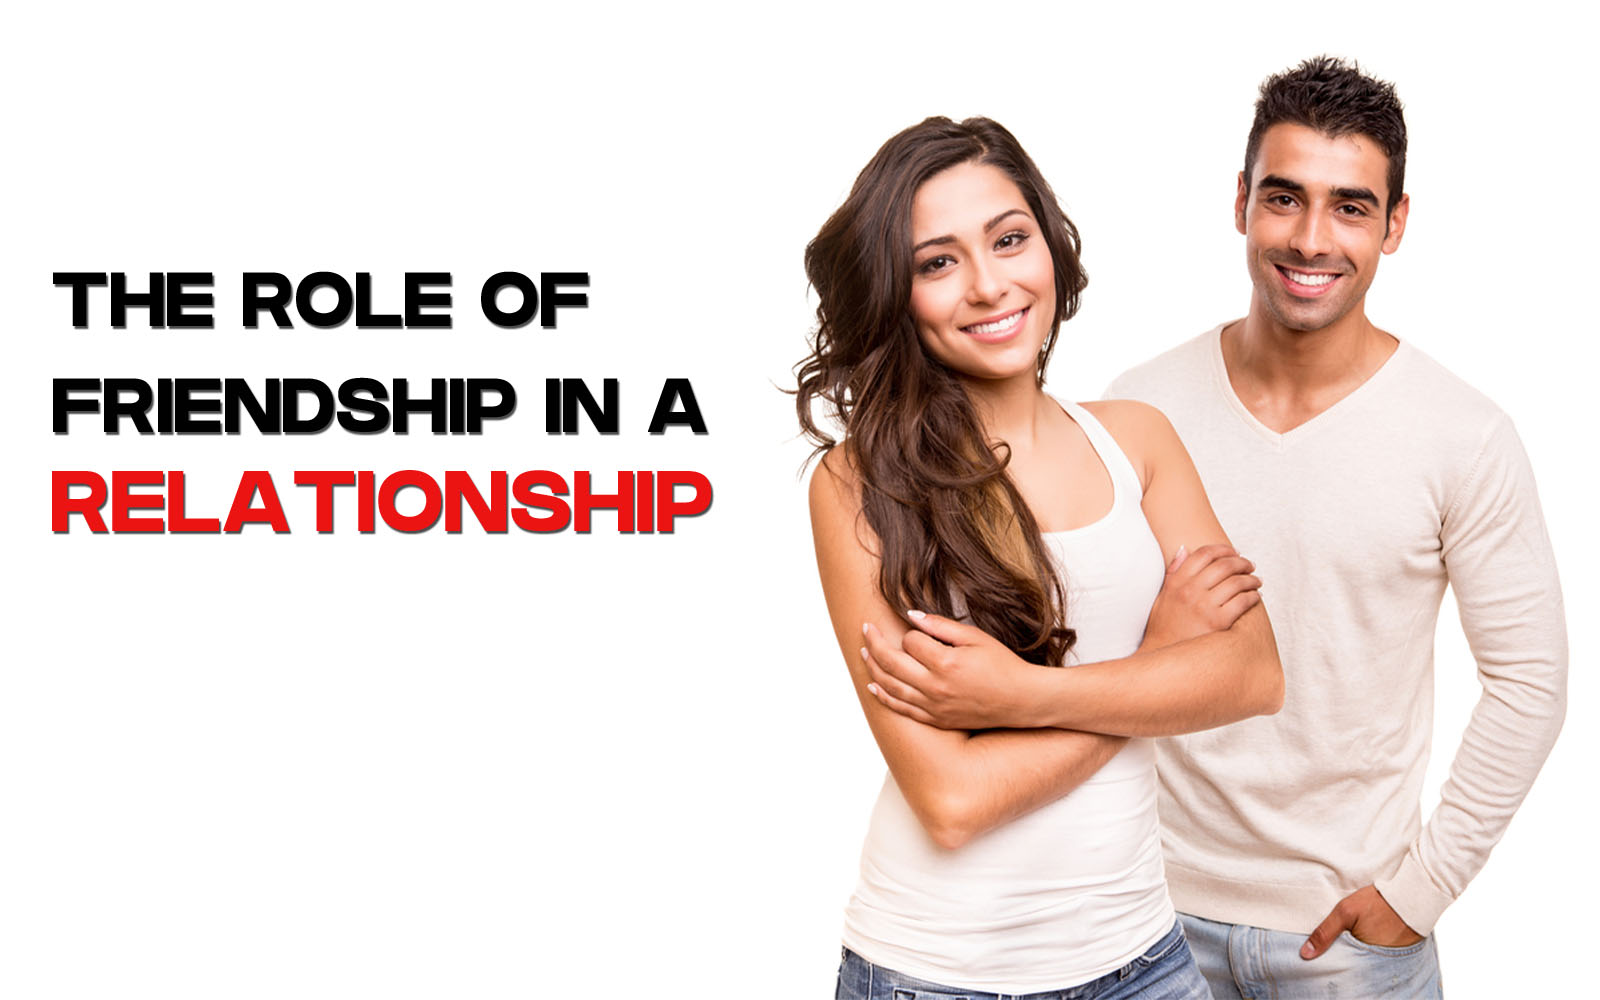 The Role of Friendship in a Relationship